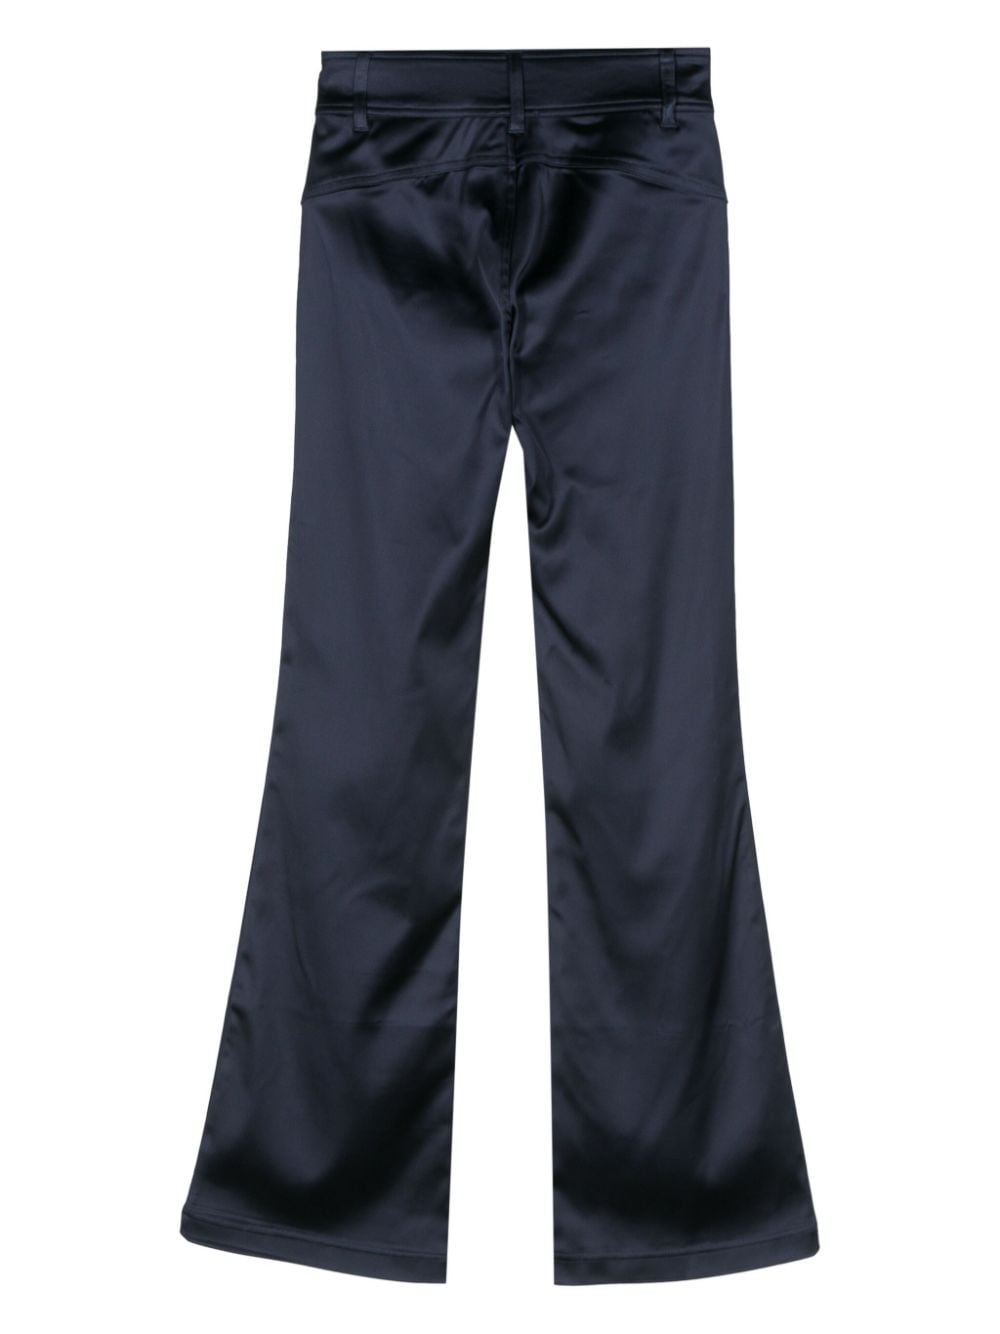 Diesel P-stell flared trousers - Blauw